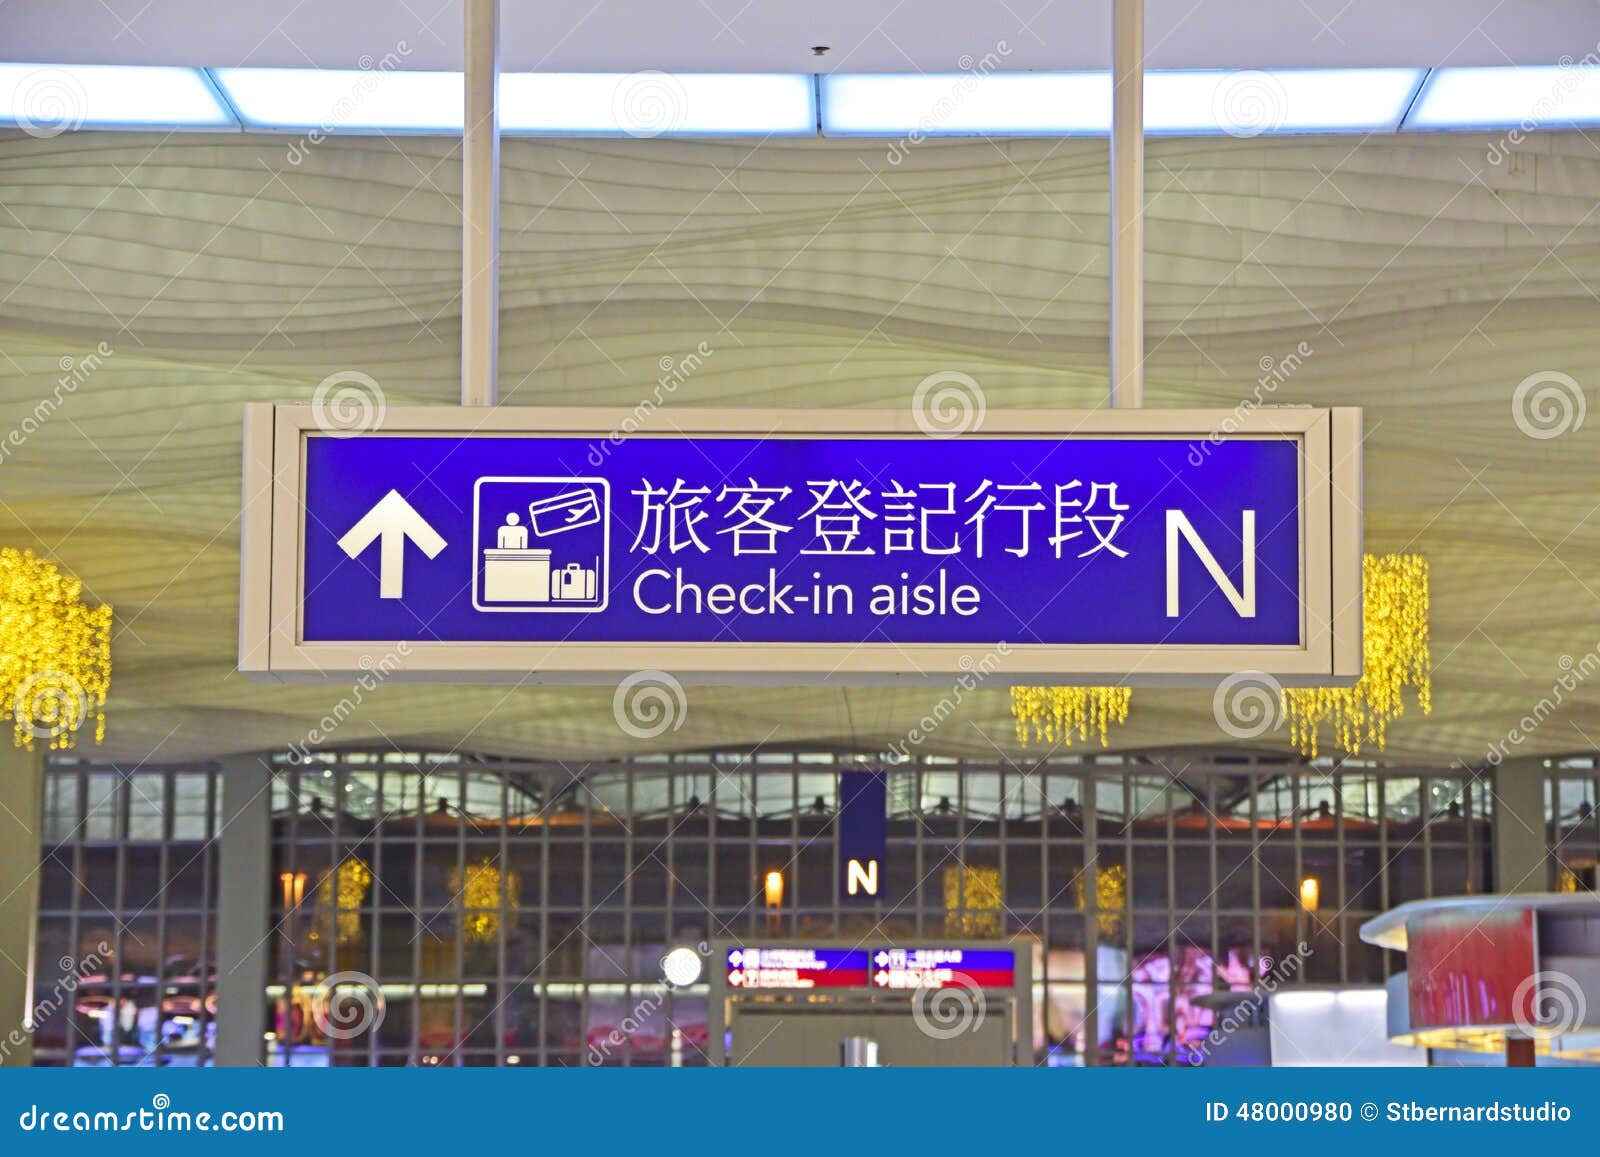 Check In Aisle Sign In Hong Kong International Airport 